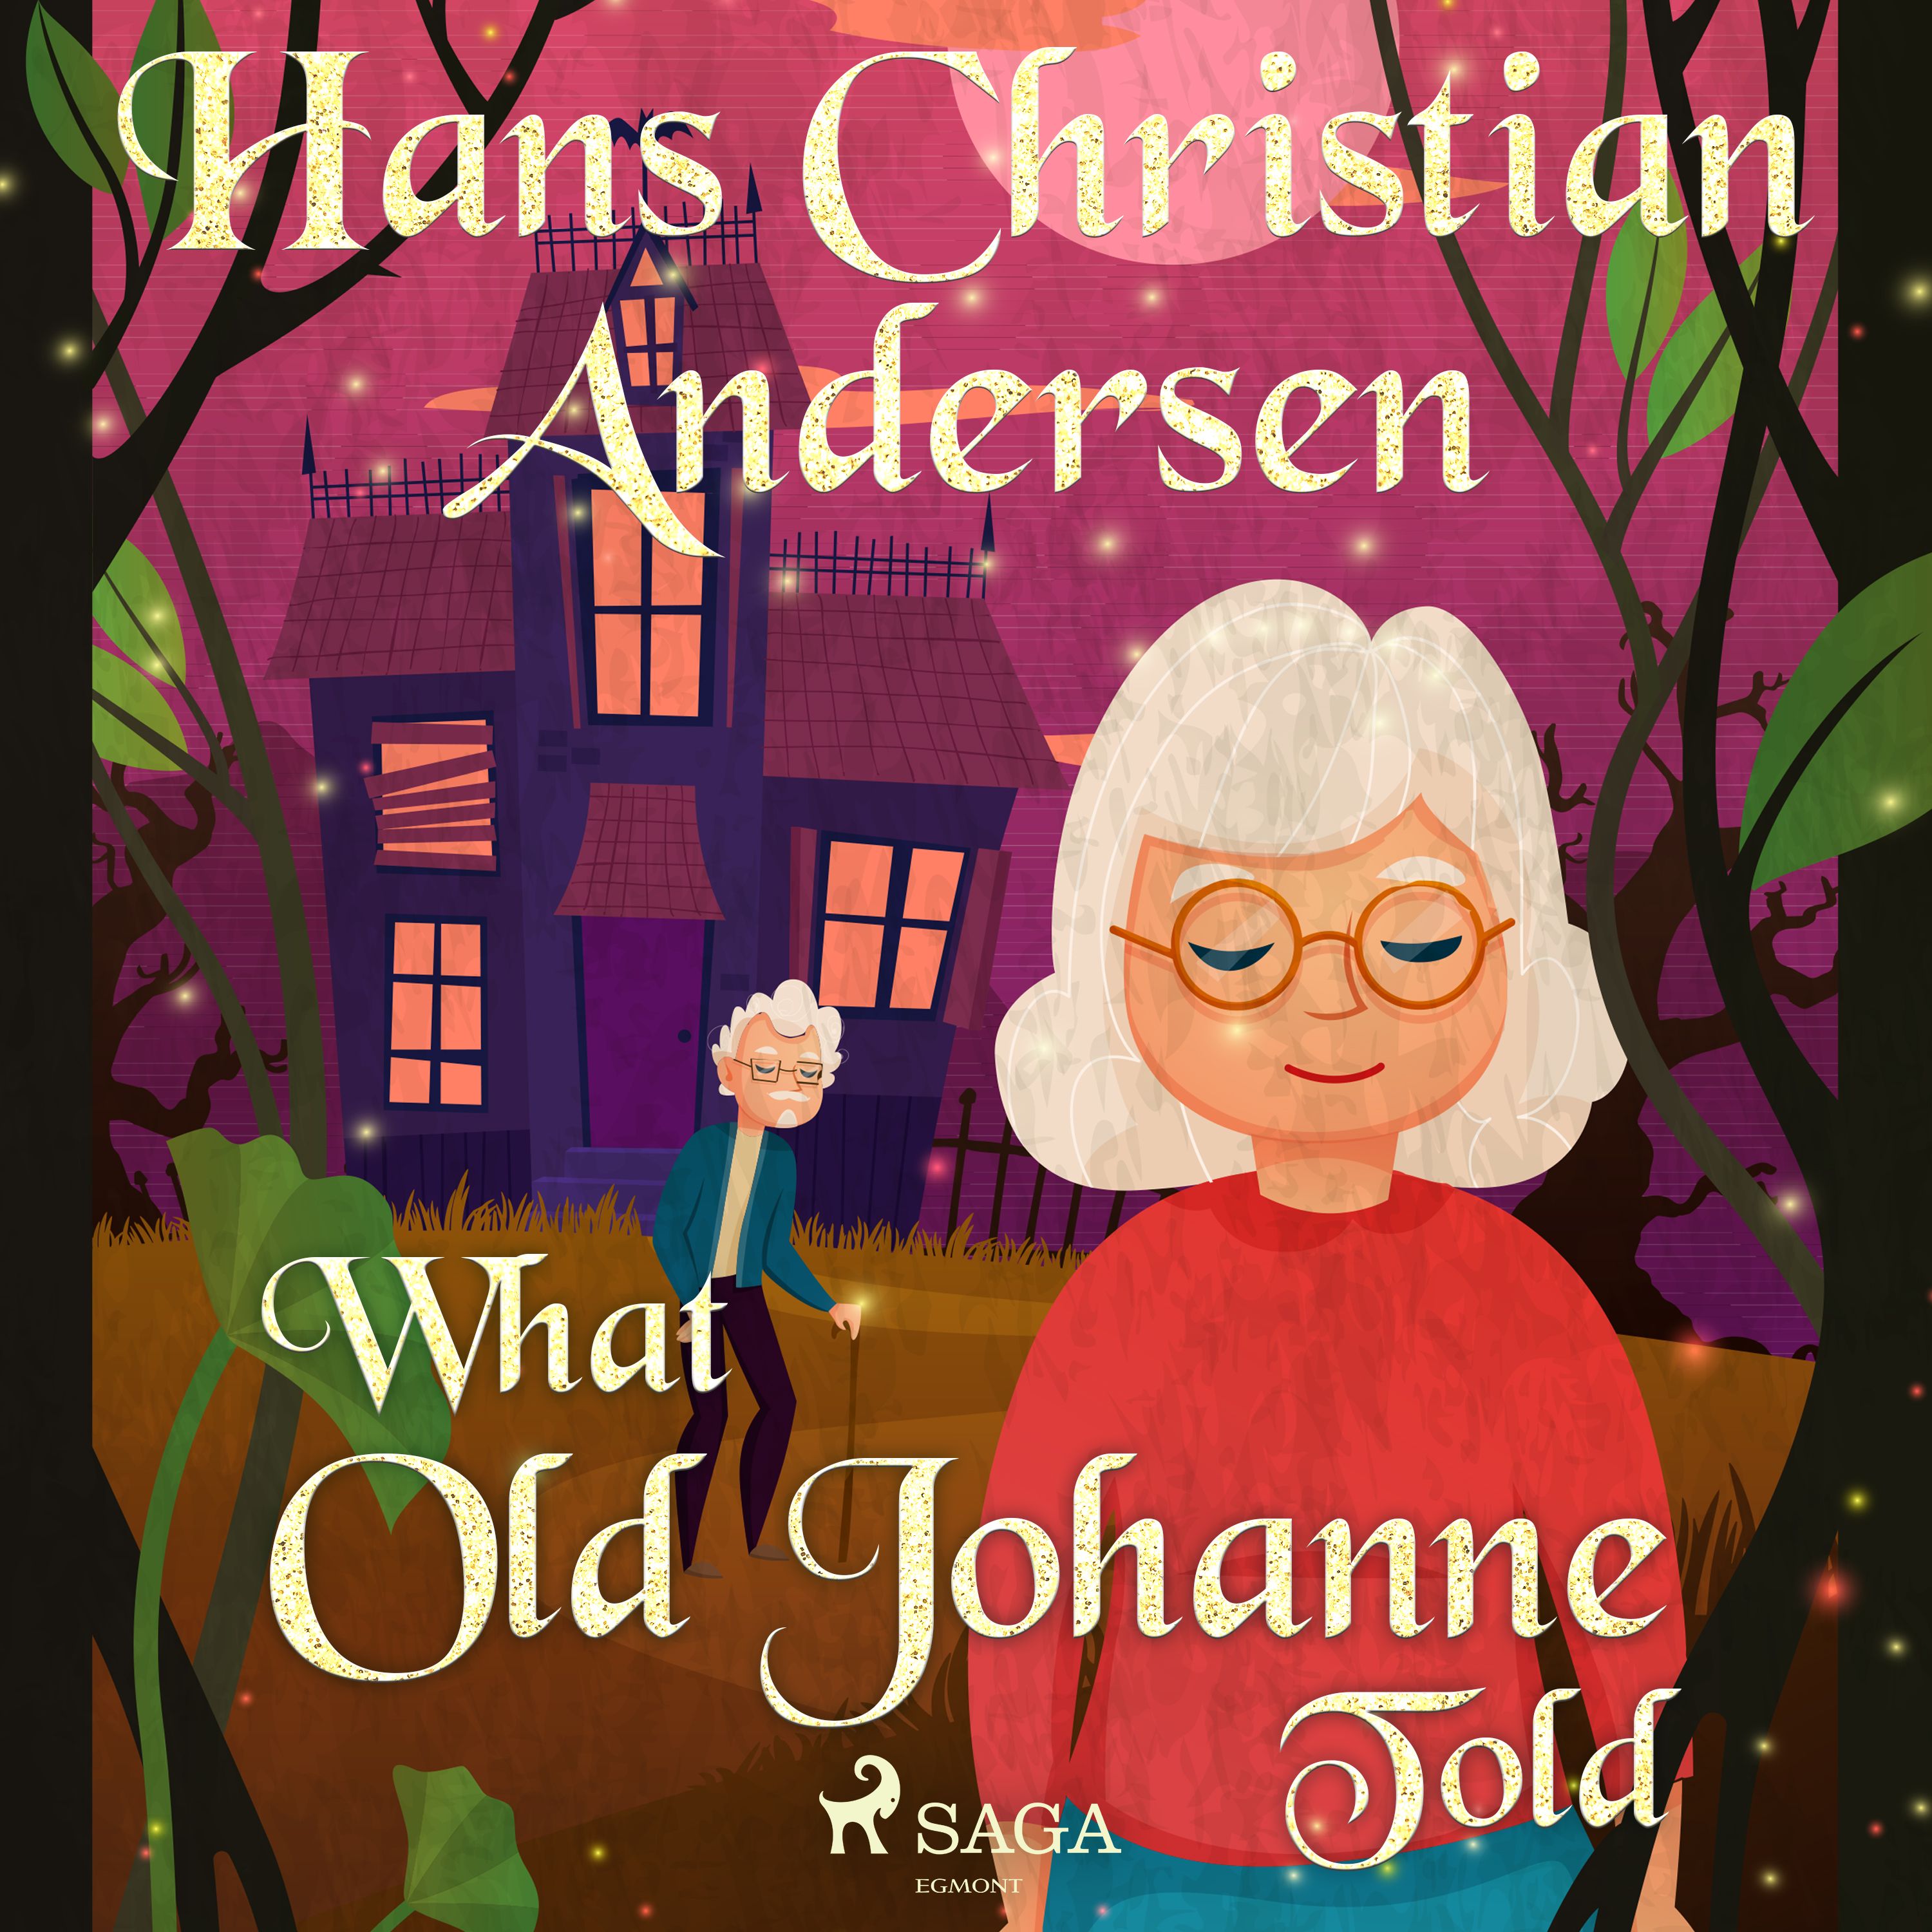 What Old Johanne Told, audiobook by Hans Christian Andersen